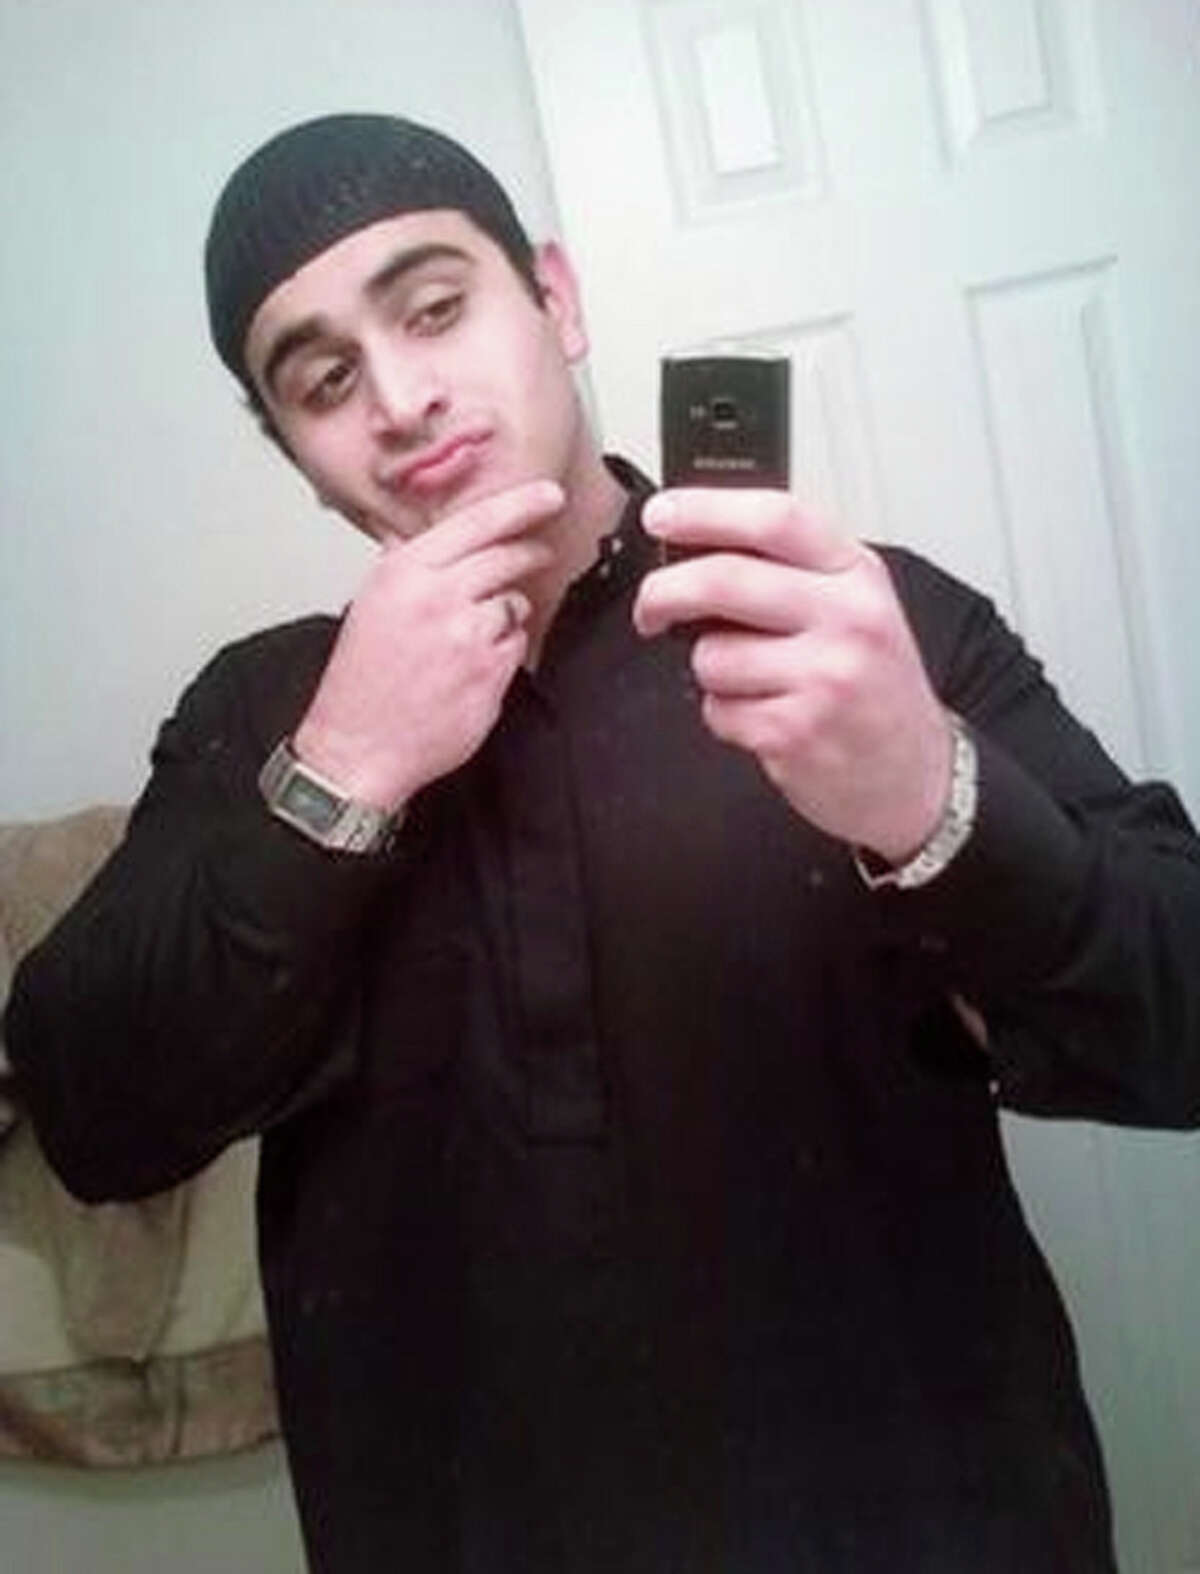 Omar Mateen frequented Pulse nightclub before he carried out the massacre and used gay dating apps.